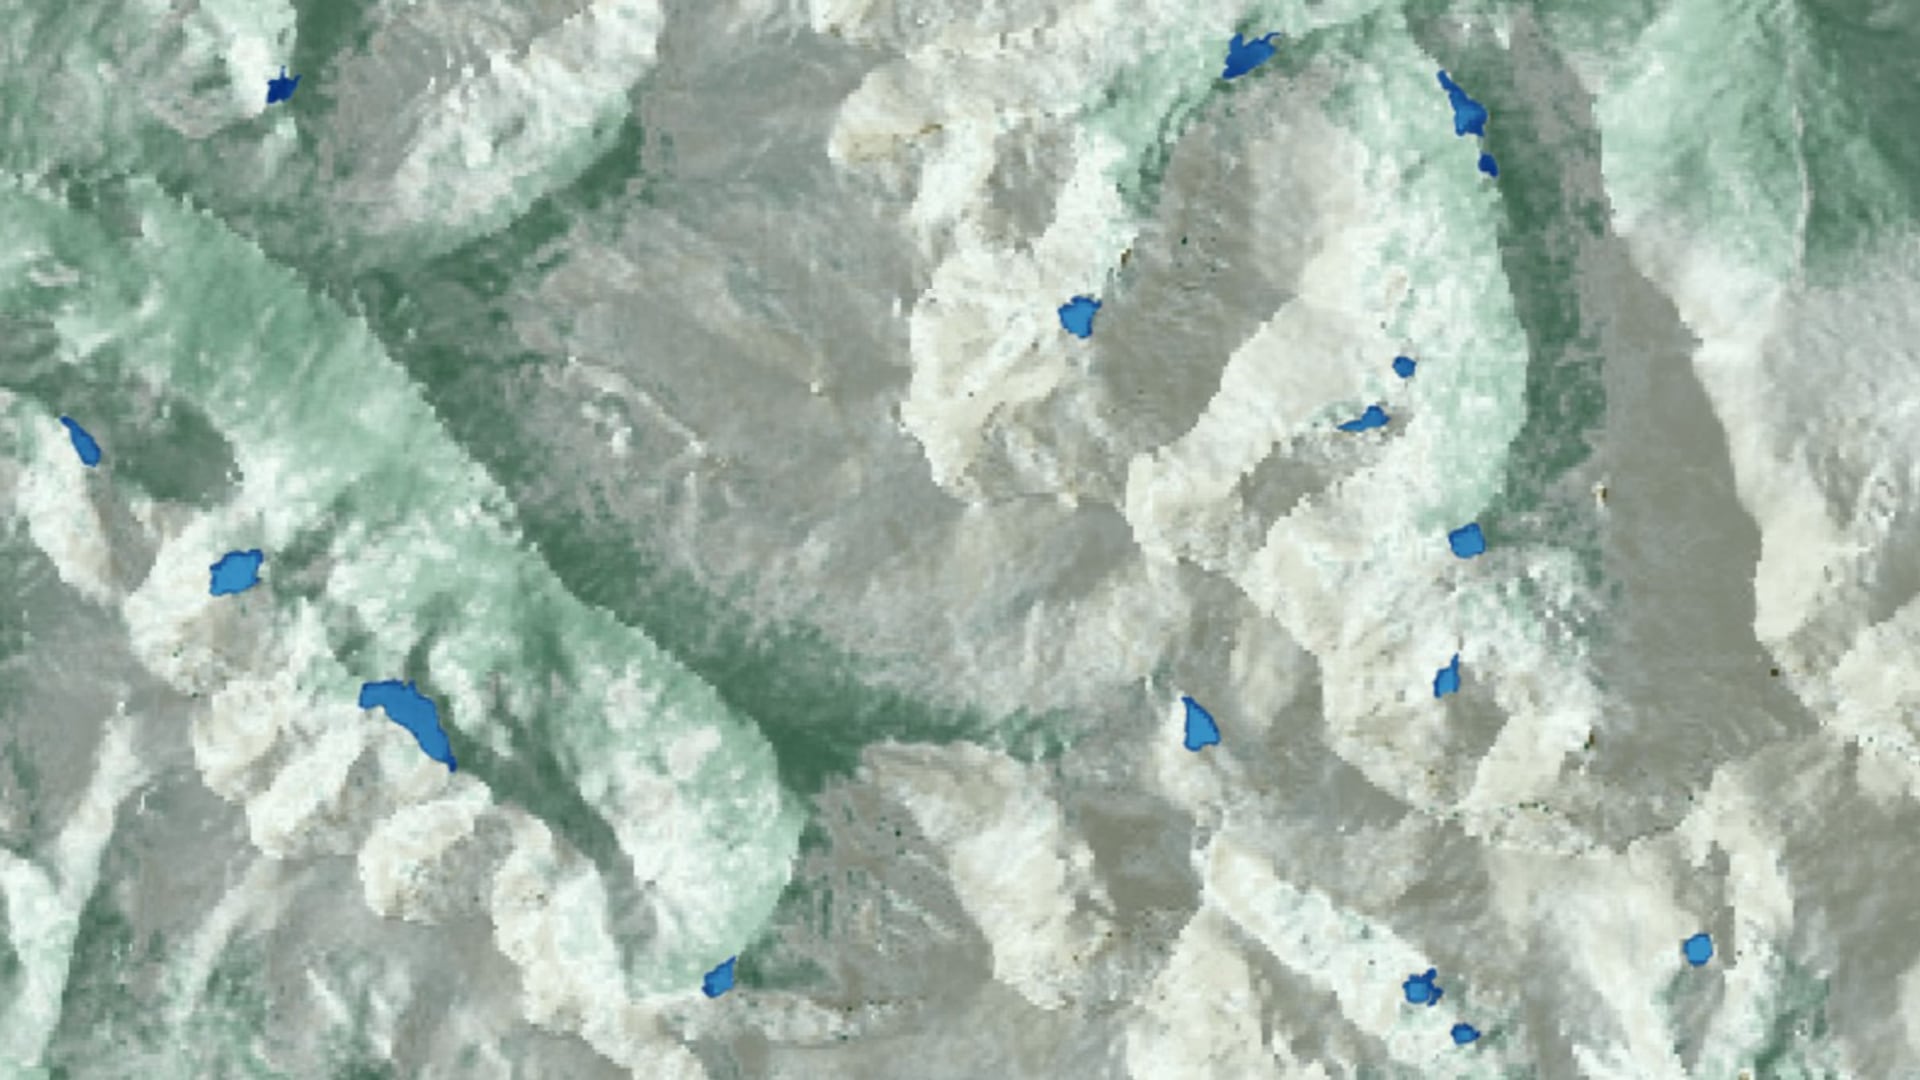 Using a Landsat 8 OLI image from September 2018, a chlorophyll-a index ((B2 - B4)/ B3) was applied over several lakes in a section of Rocky Mountain National Park. The background is NDVI combined with hillshade derived from SRTM. The dark blue within the lakes may represent higher concentrations of chlorophyll-a, a proxy for algal productivity. Utilizing remote sensing data will allow researchers to efficiently monitor water quality in lakes throughout the mountains in Colorado.